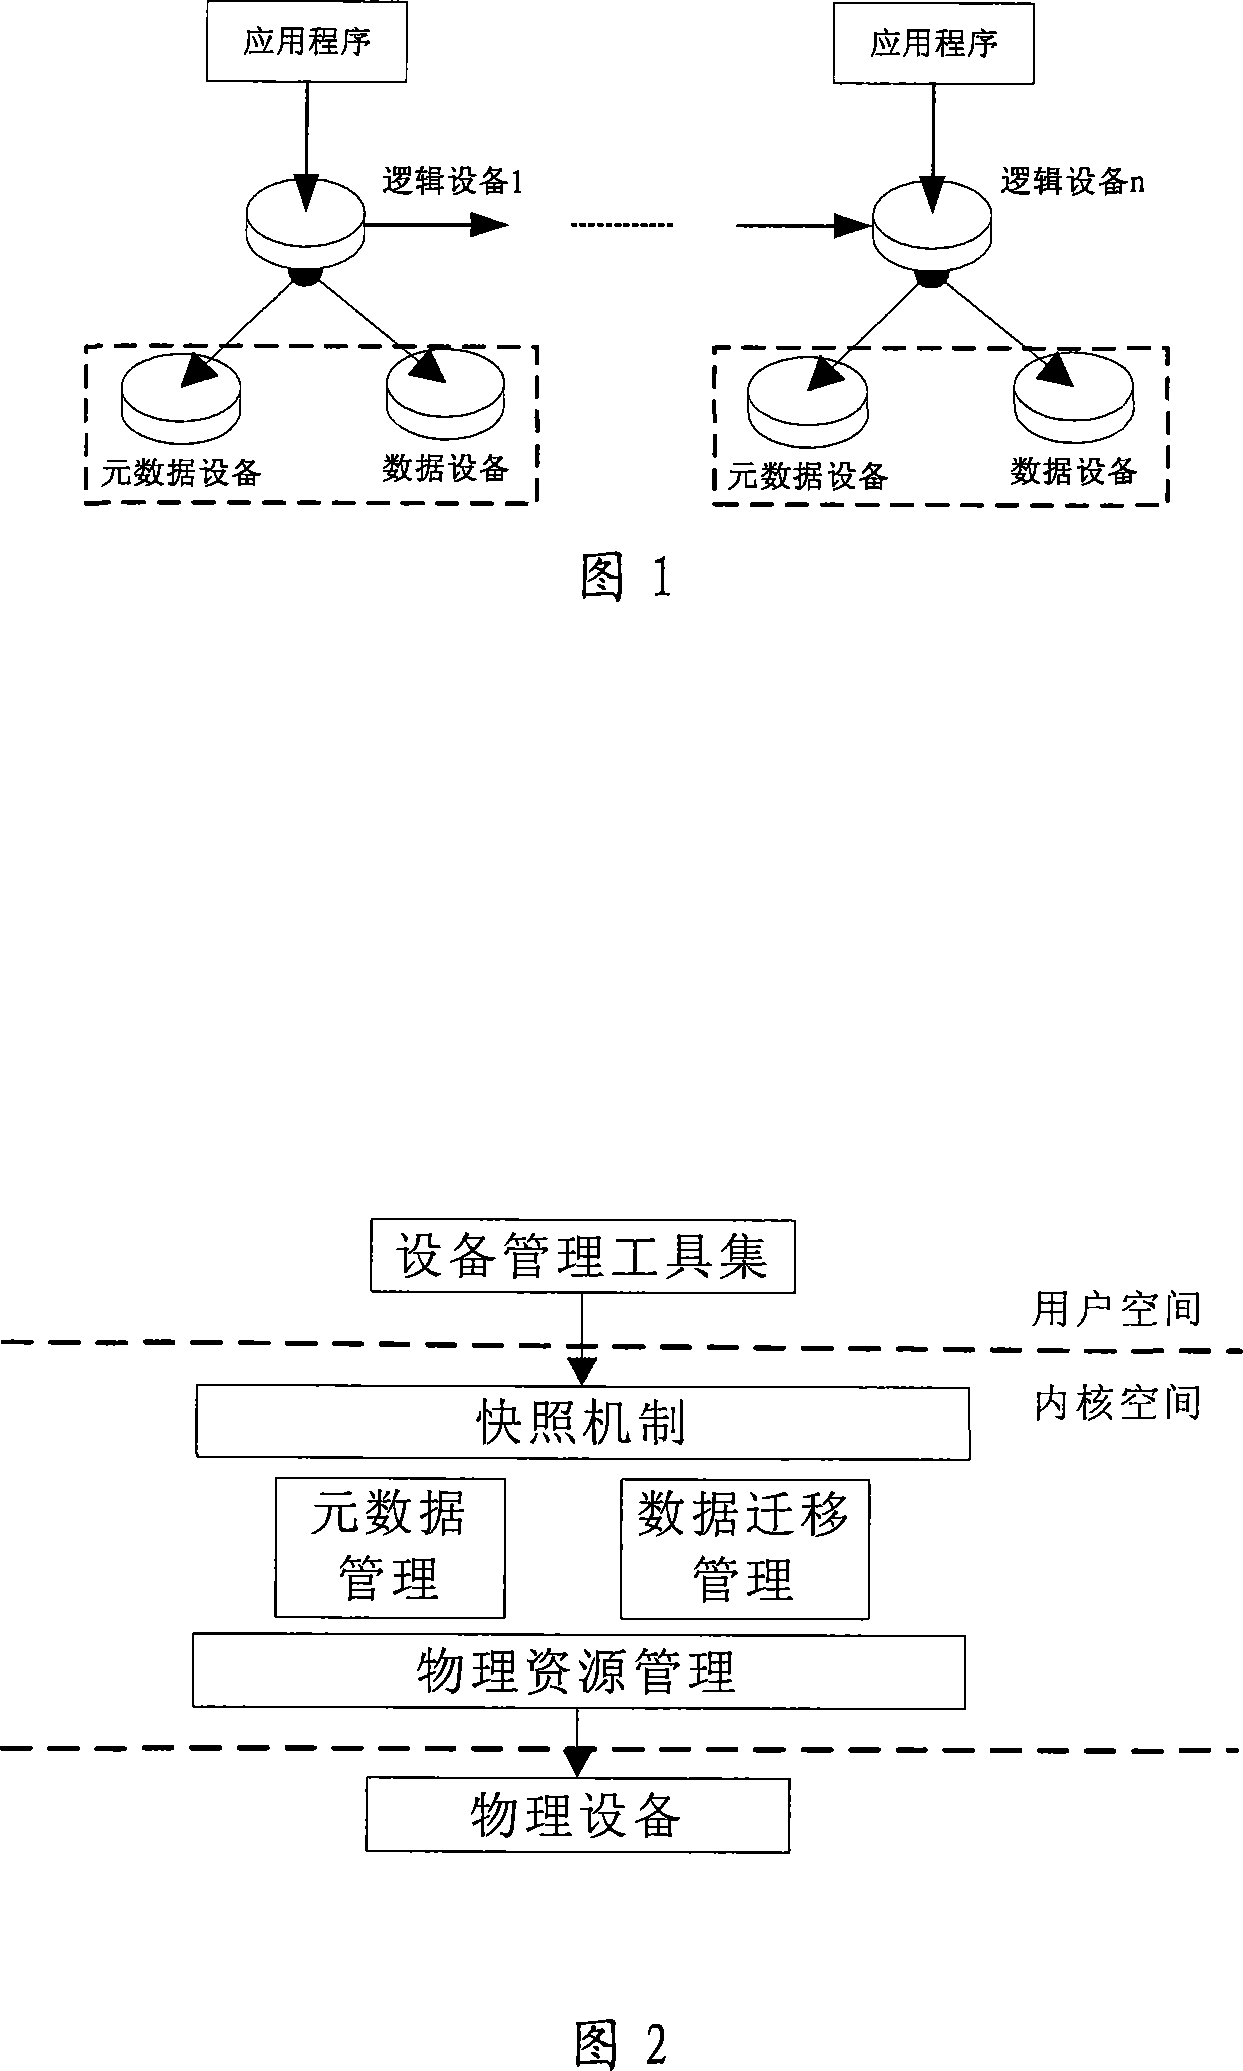 Snapshot system and method of use thereof